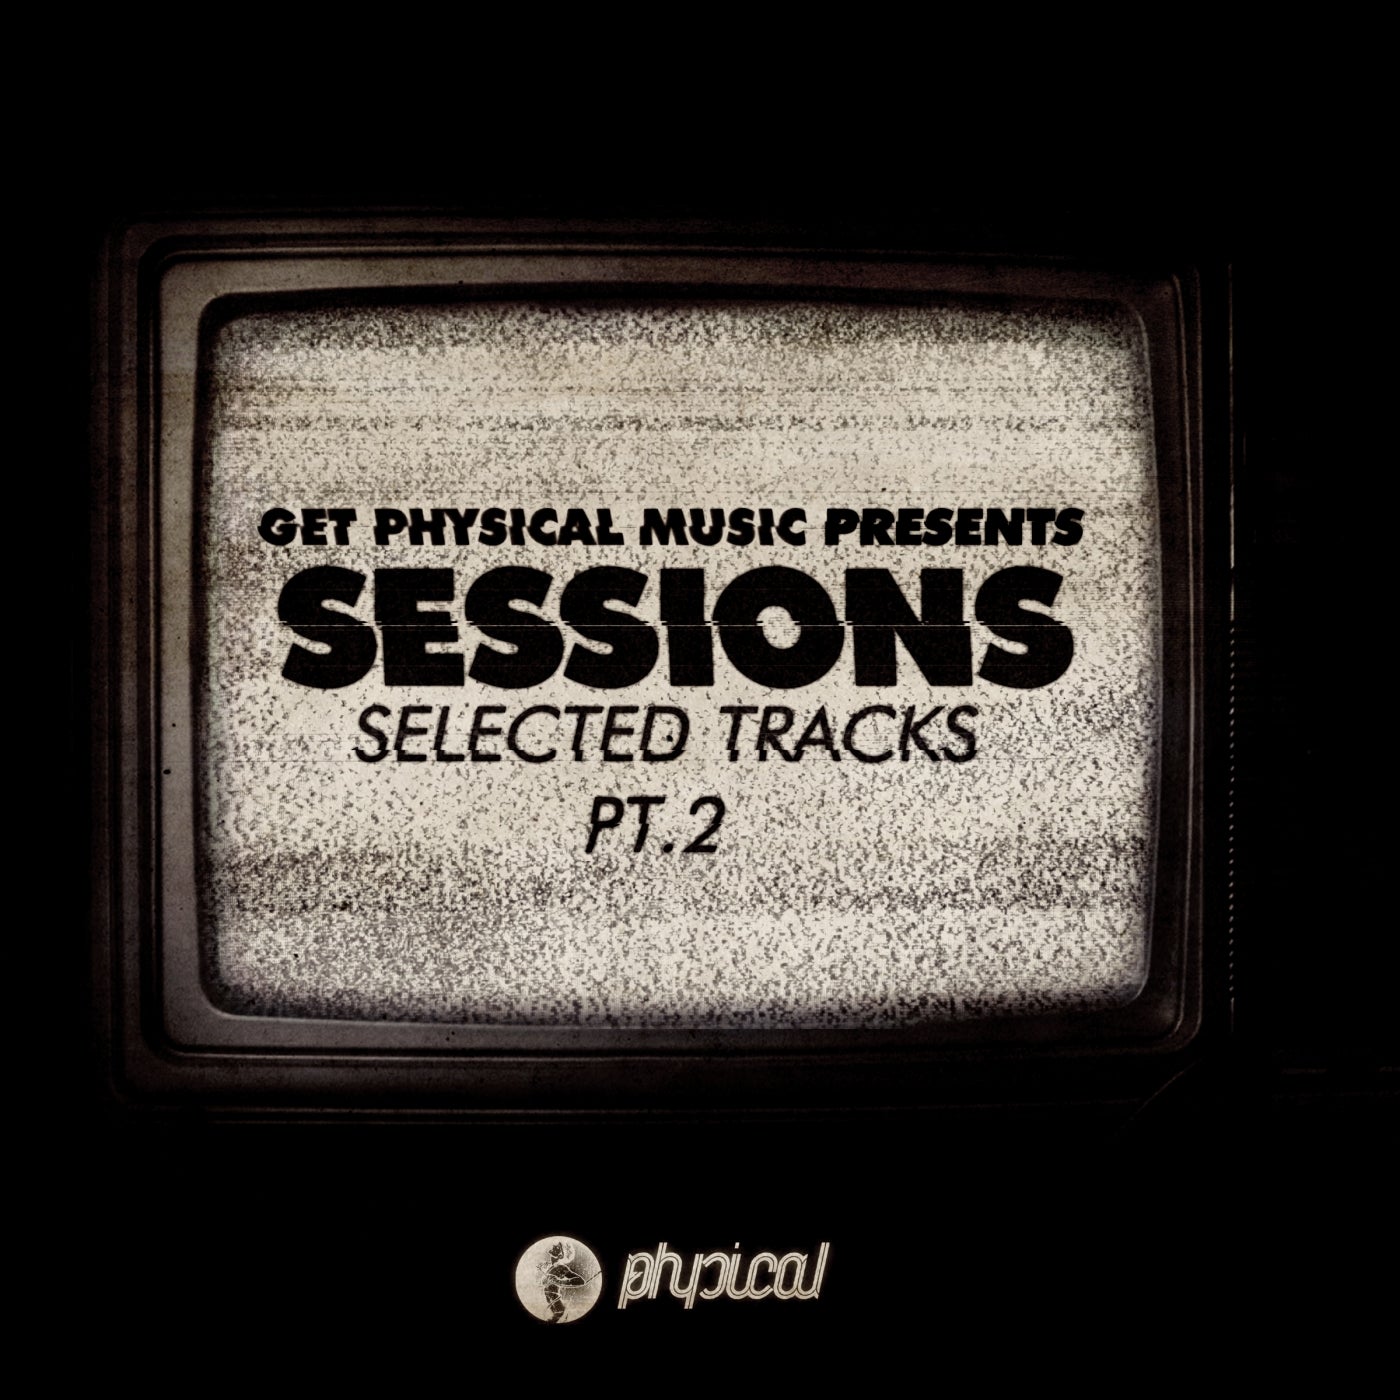 Select tracks. Get physical. Selected tracks. Let's get physical (1983).